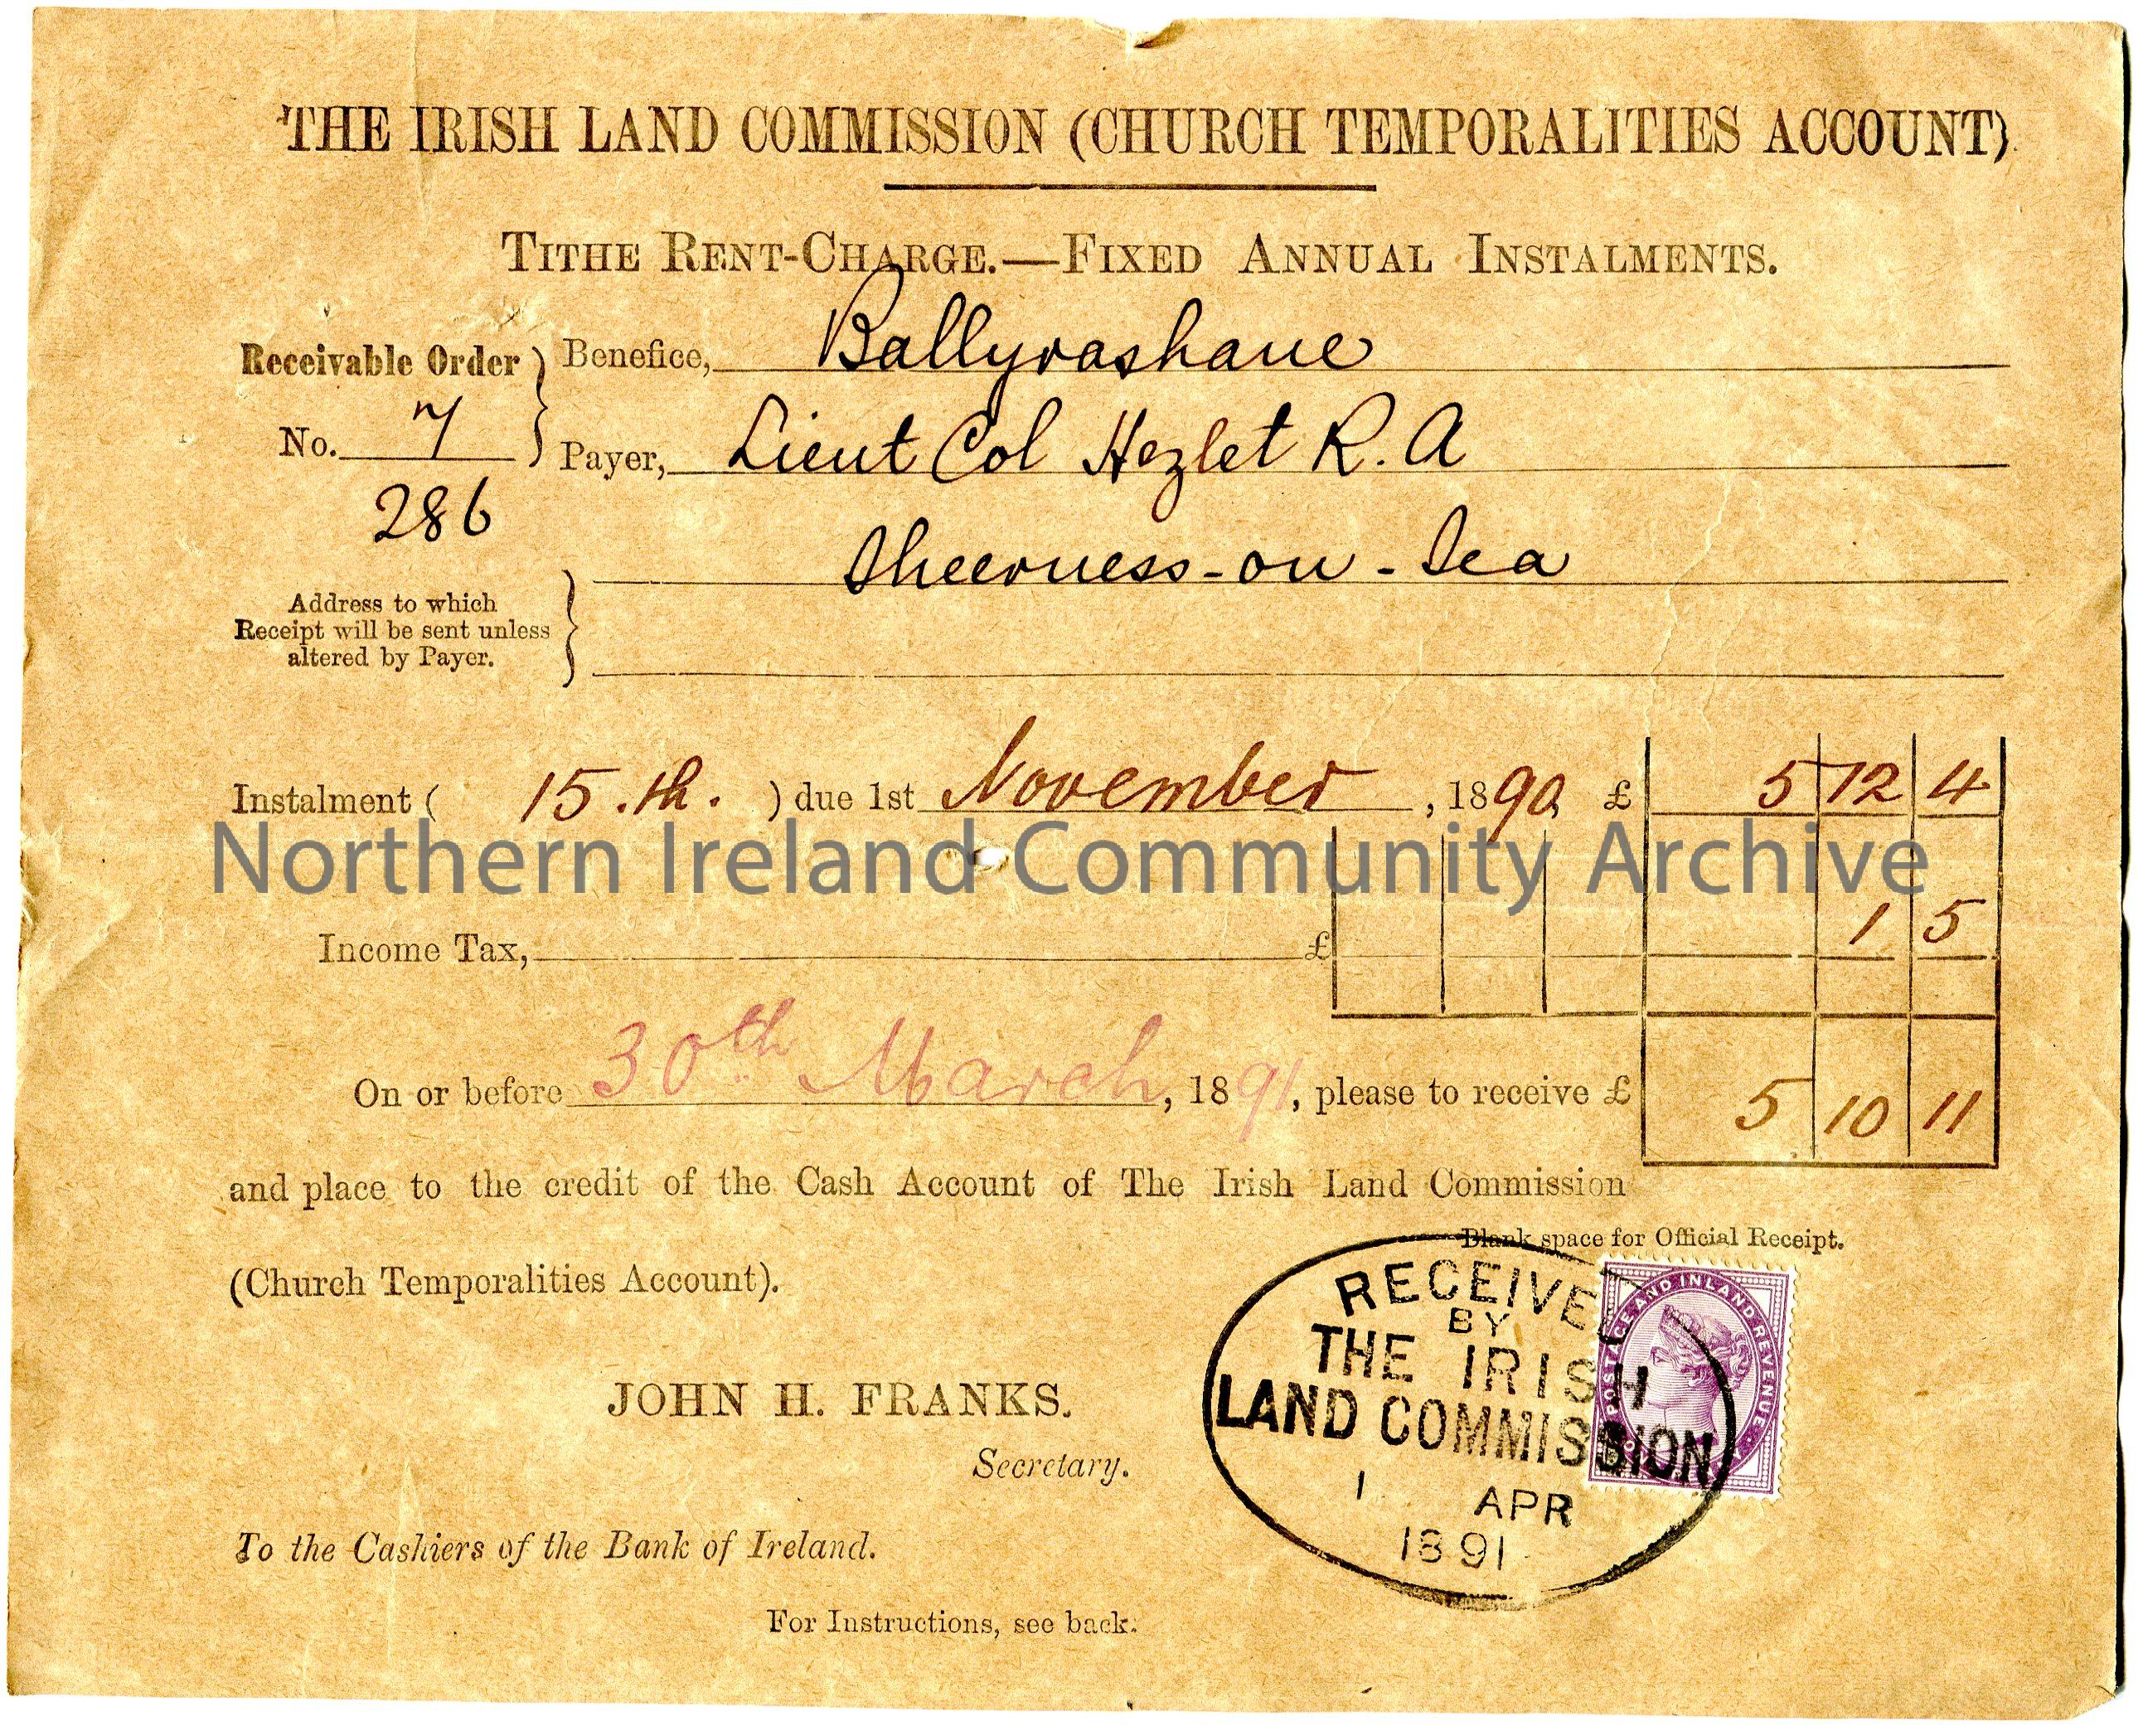 Handwritten Receivable Order, No. 7 286, for payment of £5.10.11 due 15th November 1890 to credit the Cash Account of The Irish Land Commission (…